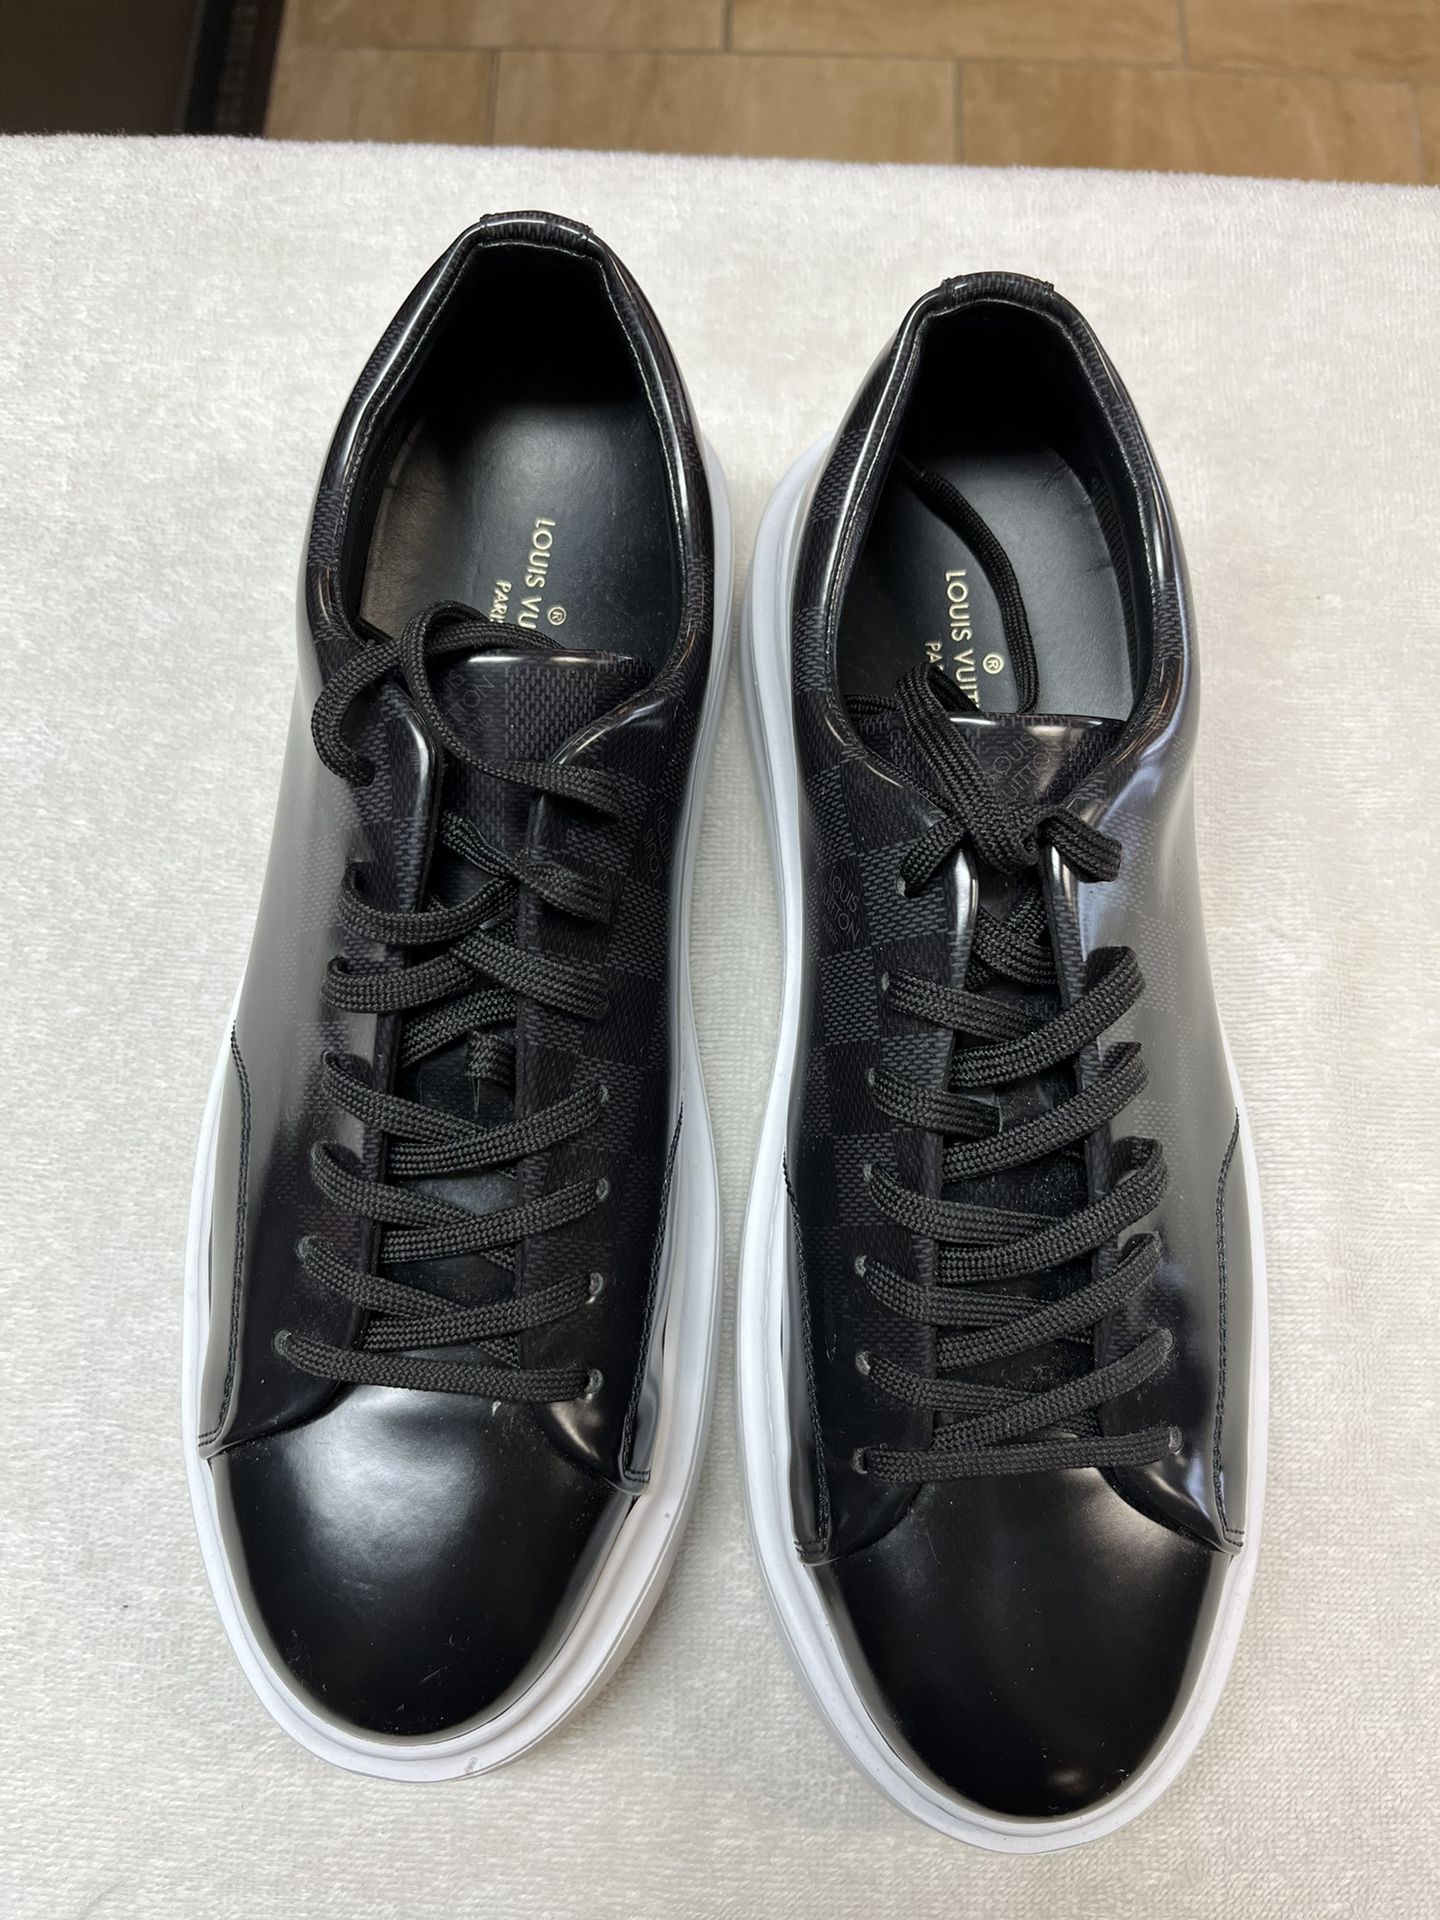 Louis Vuitton BEVERLY HILLS SNEAKER 100% Authentic for Sale in Los